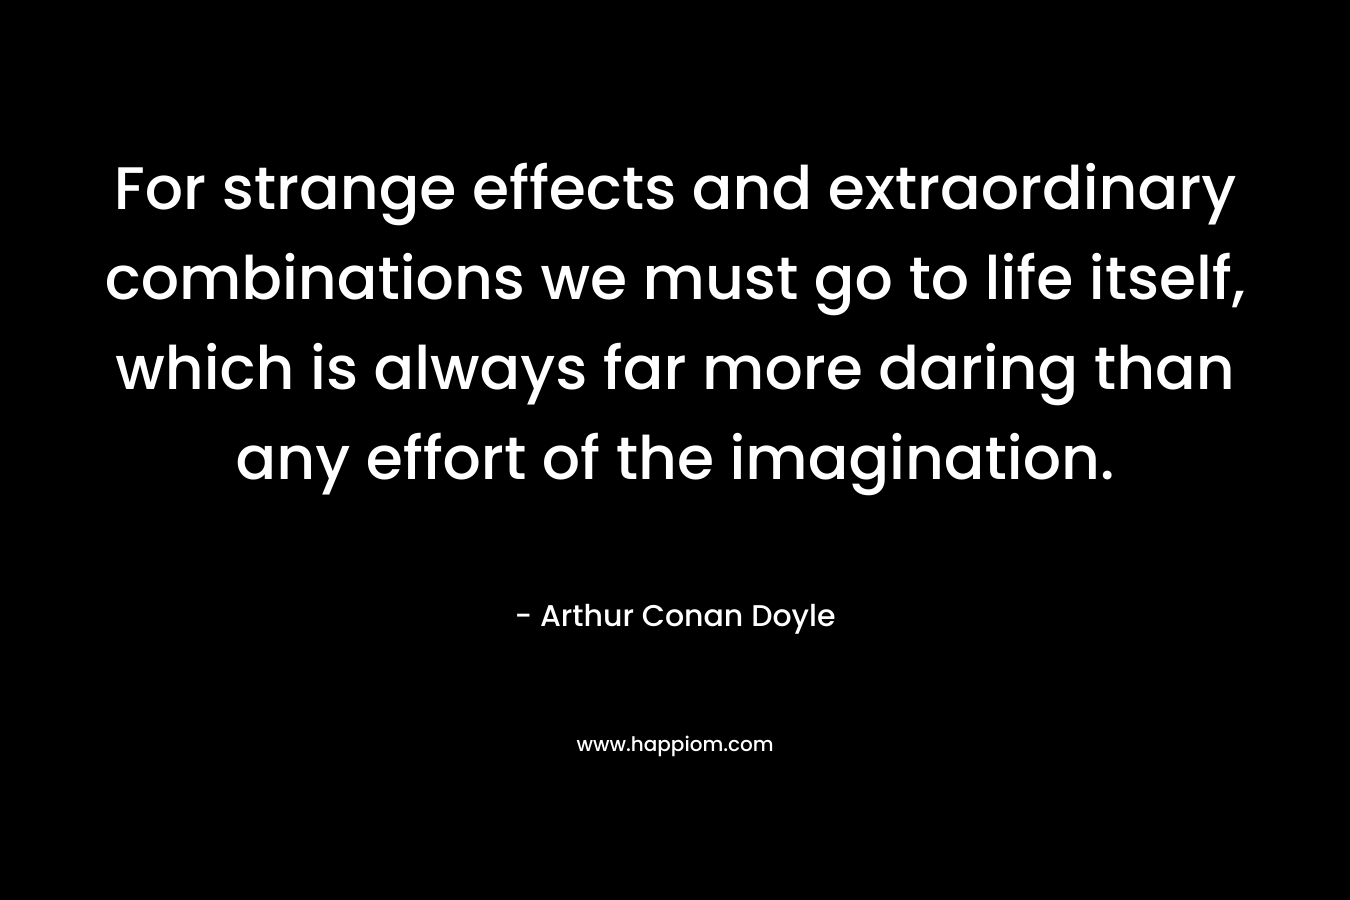 For strange effects and extraordinary combinations we must go to life itself, which is always far more daring than any effort of the imagination.